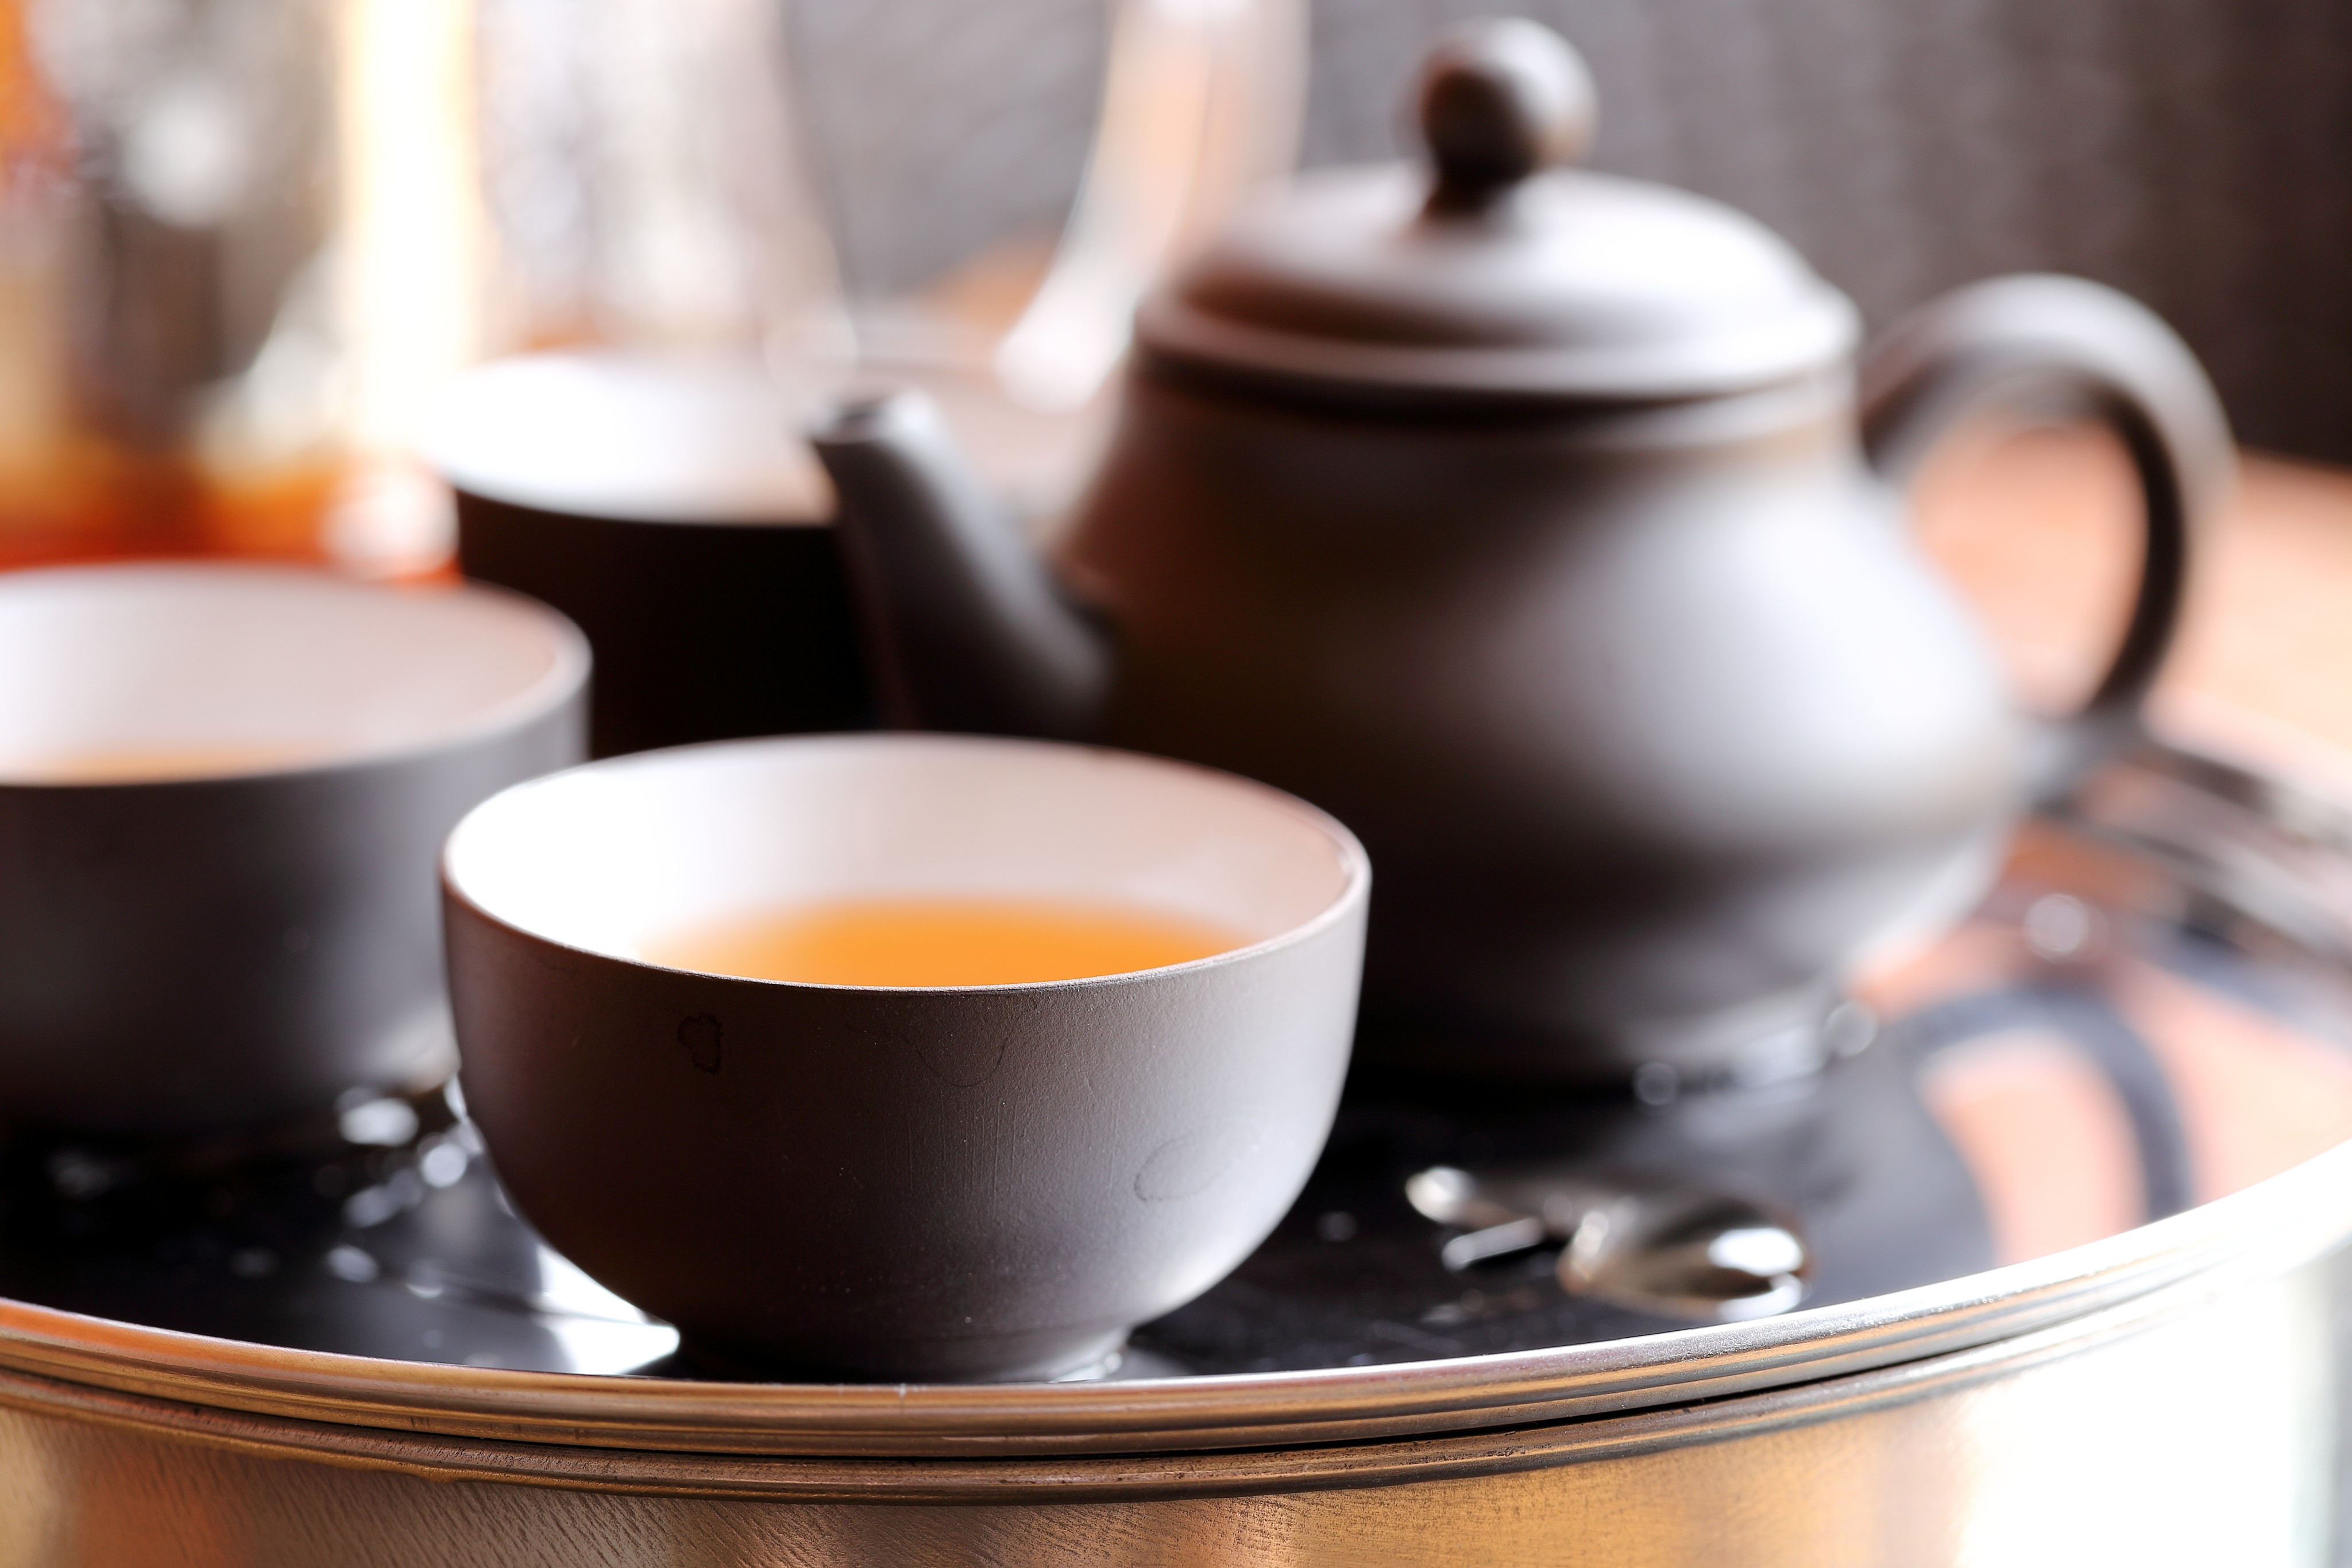 The study found that habitual tea drinking may potentially balance the gut flora and bile acids from the liver. Photo: Shutterstock Images